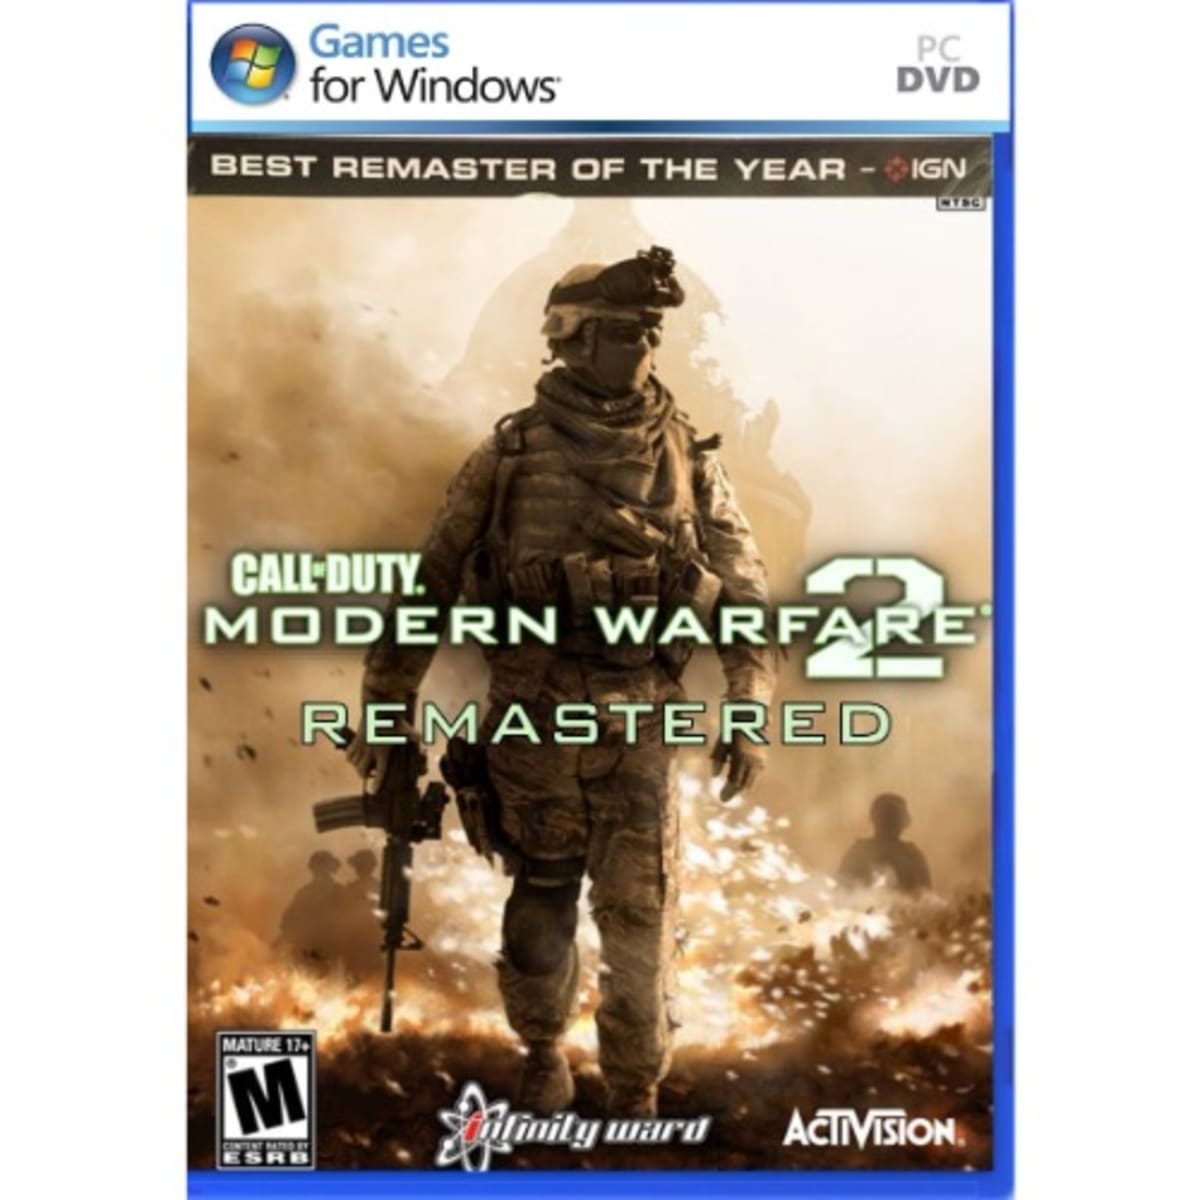 Call of Duty Modern Warfare 2: Campaign Remastered PC